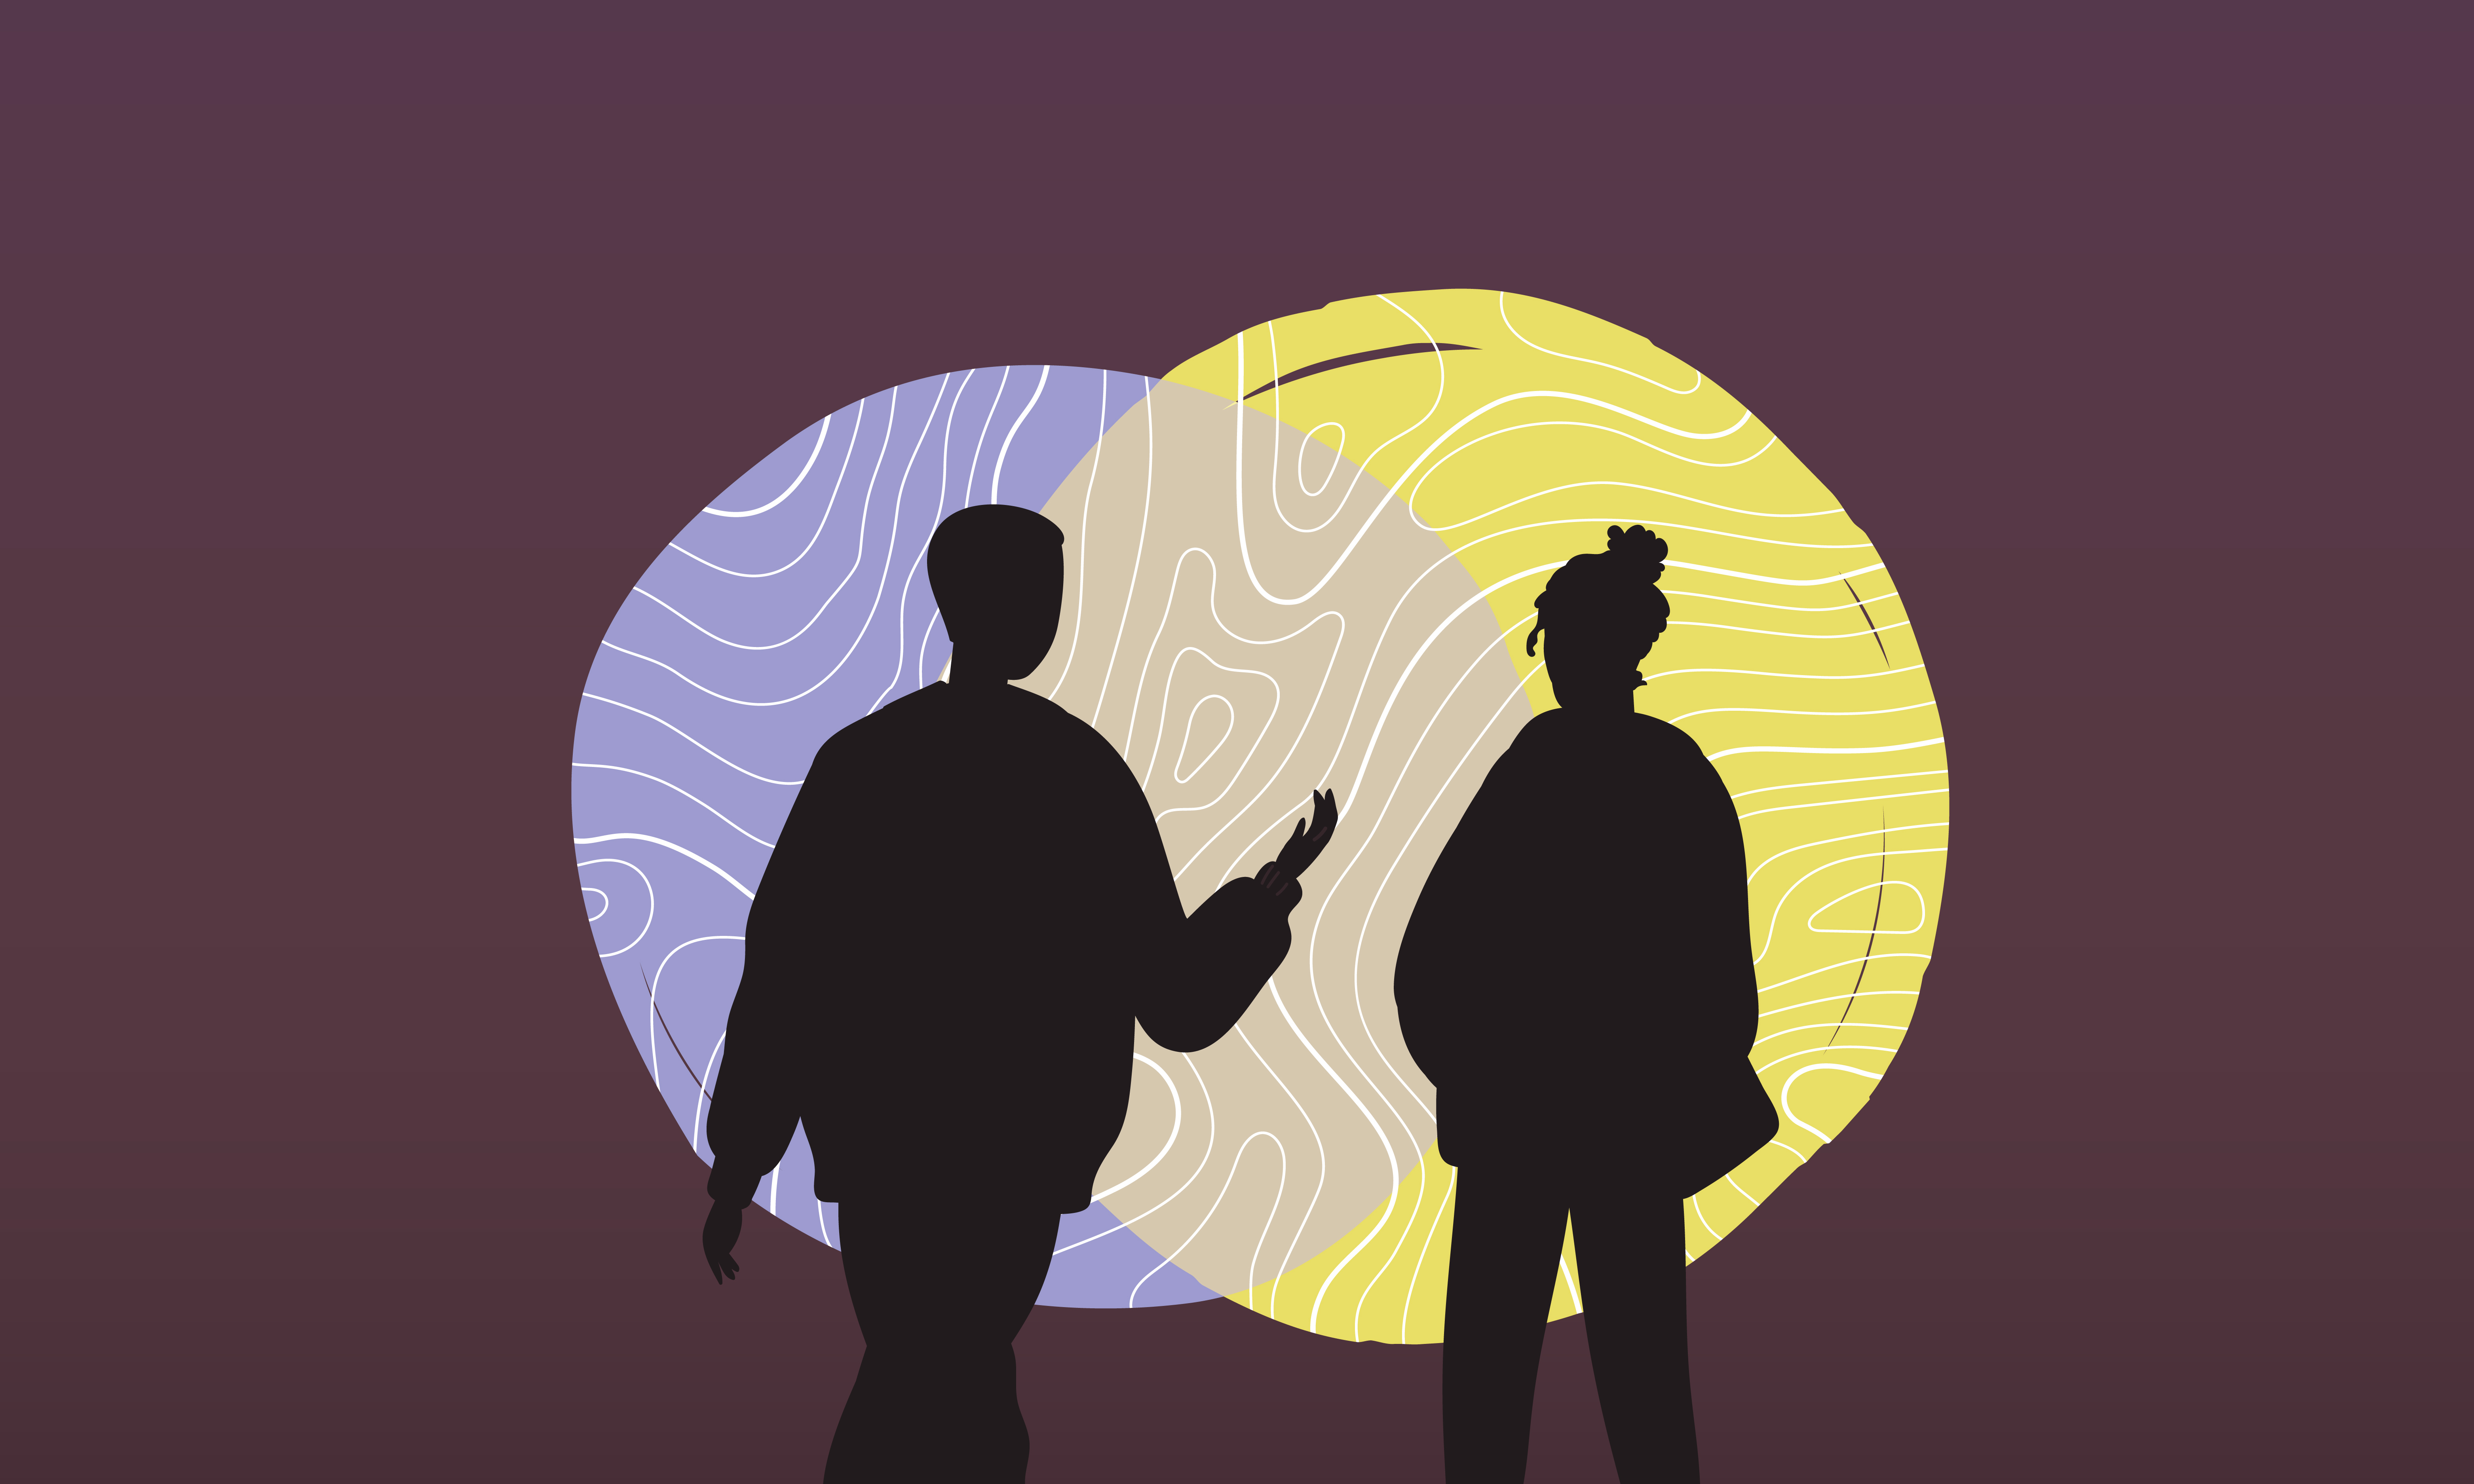 Illustration of two silhouetted people inside overlapping circles, with one person holding out a hand.